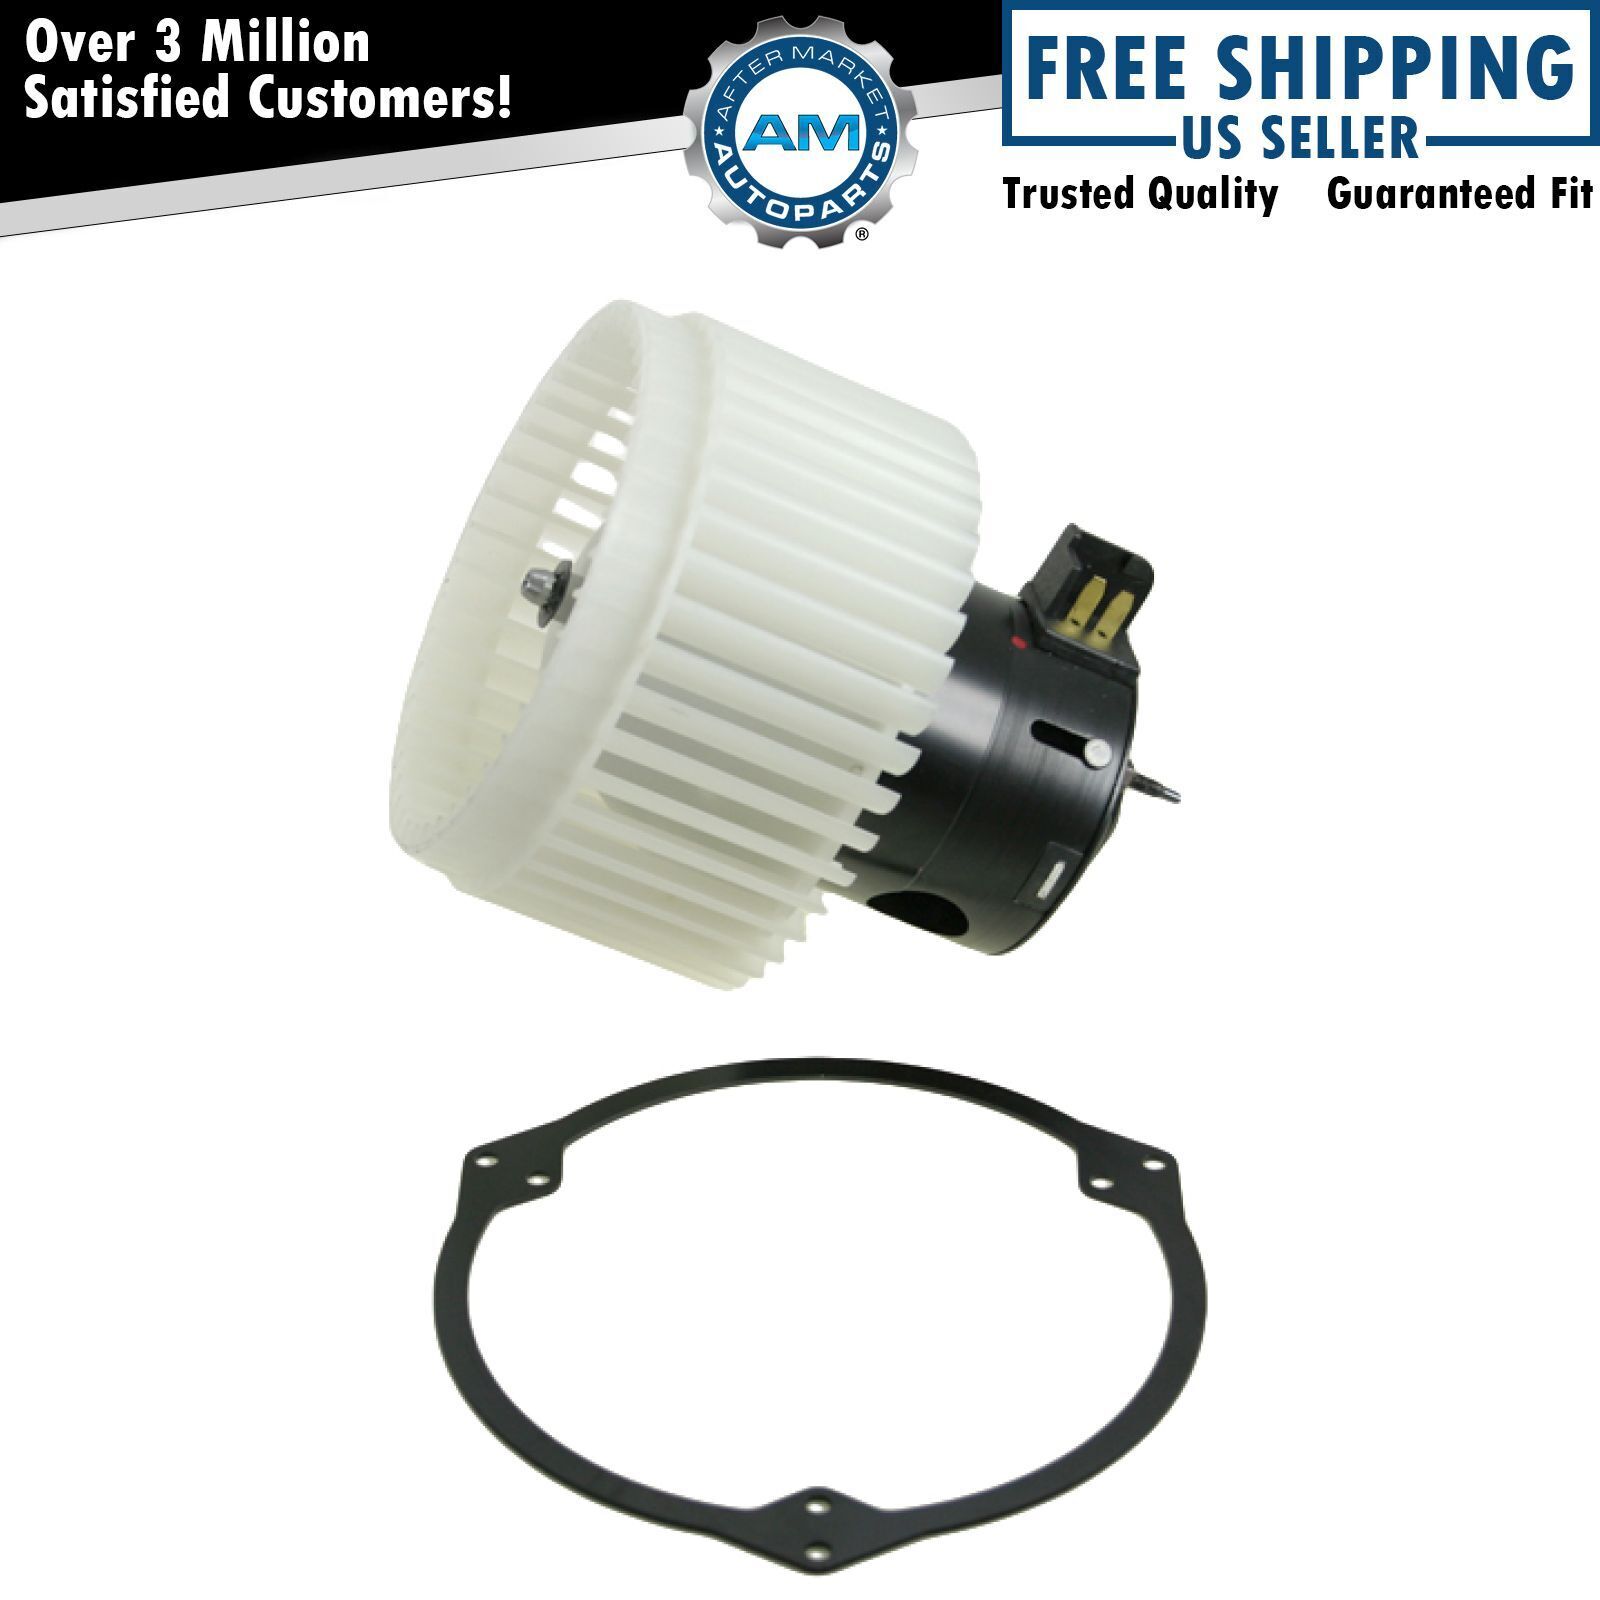 Heater AC Blower Motor w/ Fan Cage for Cobalt HHR Ion G5 Brand New